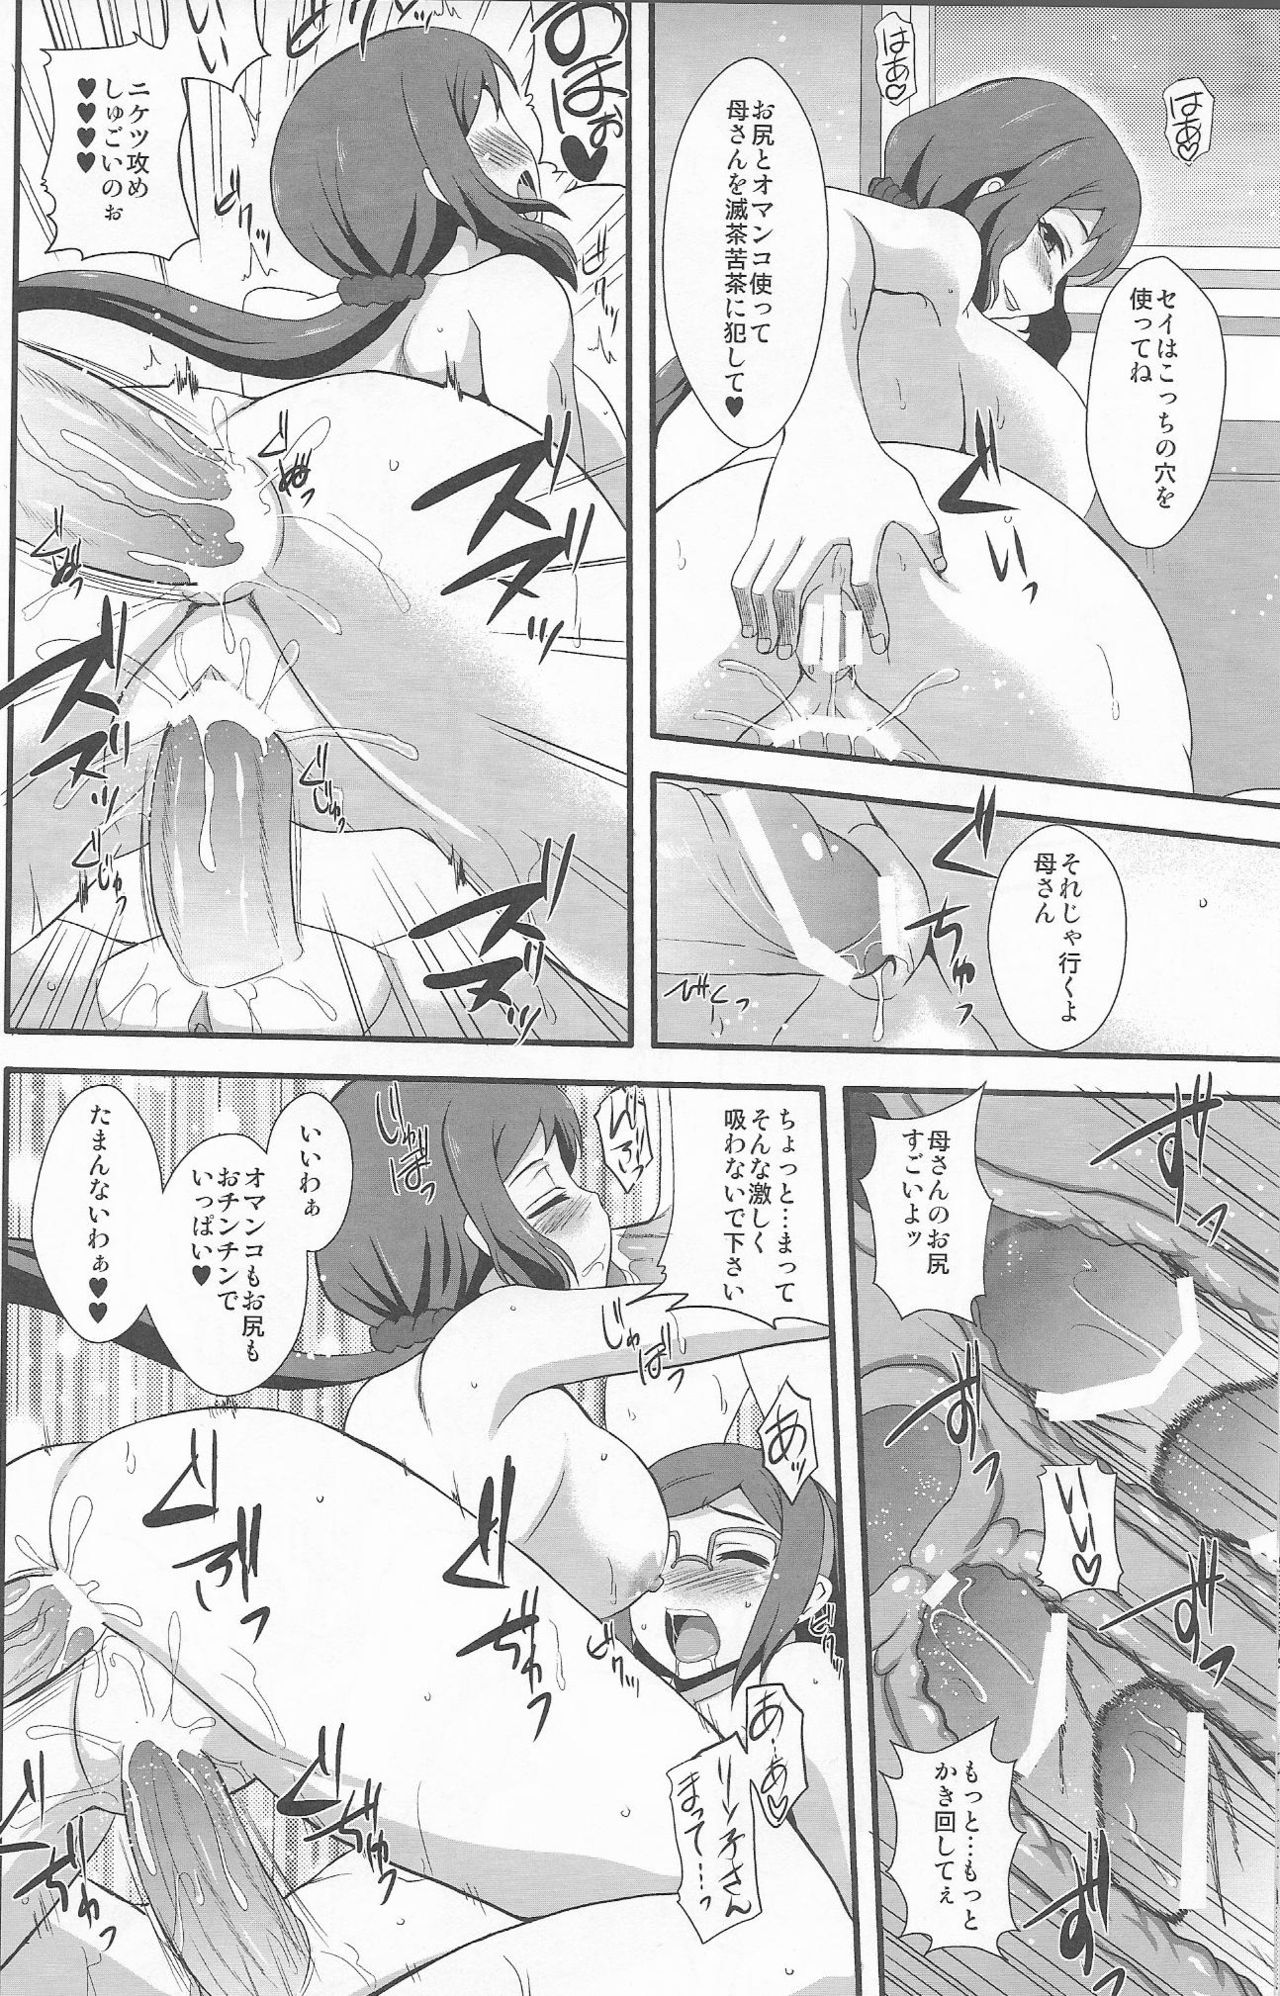 (CT23) [Take Out (Zeros)] SEX FIGHTERS (Gundam Build Fighters) page 26 full